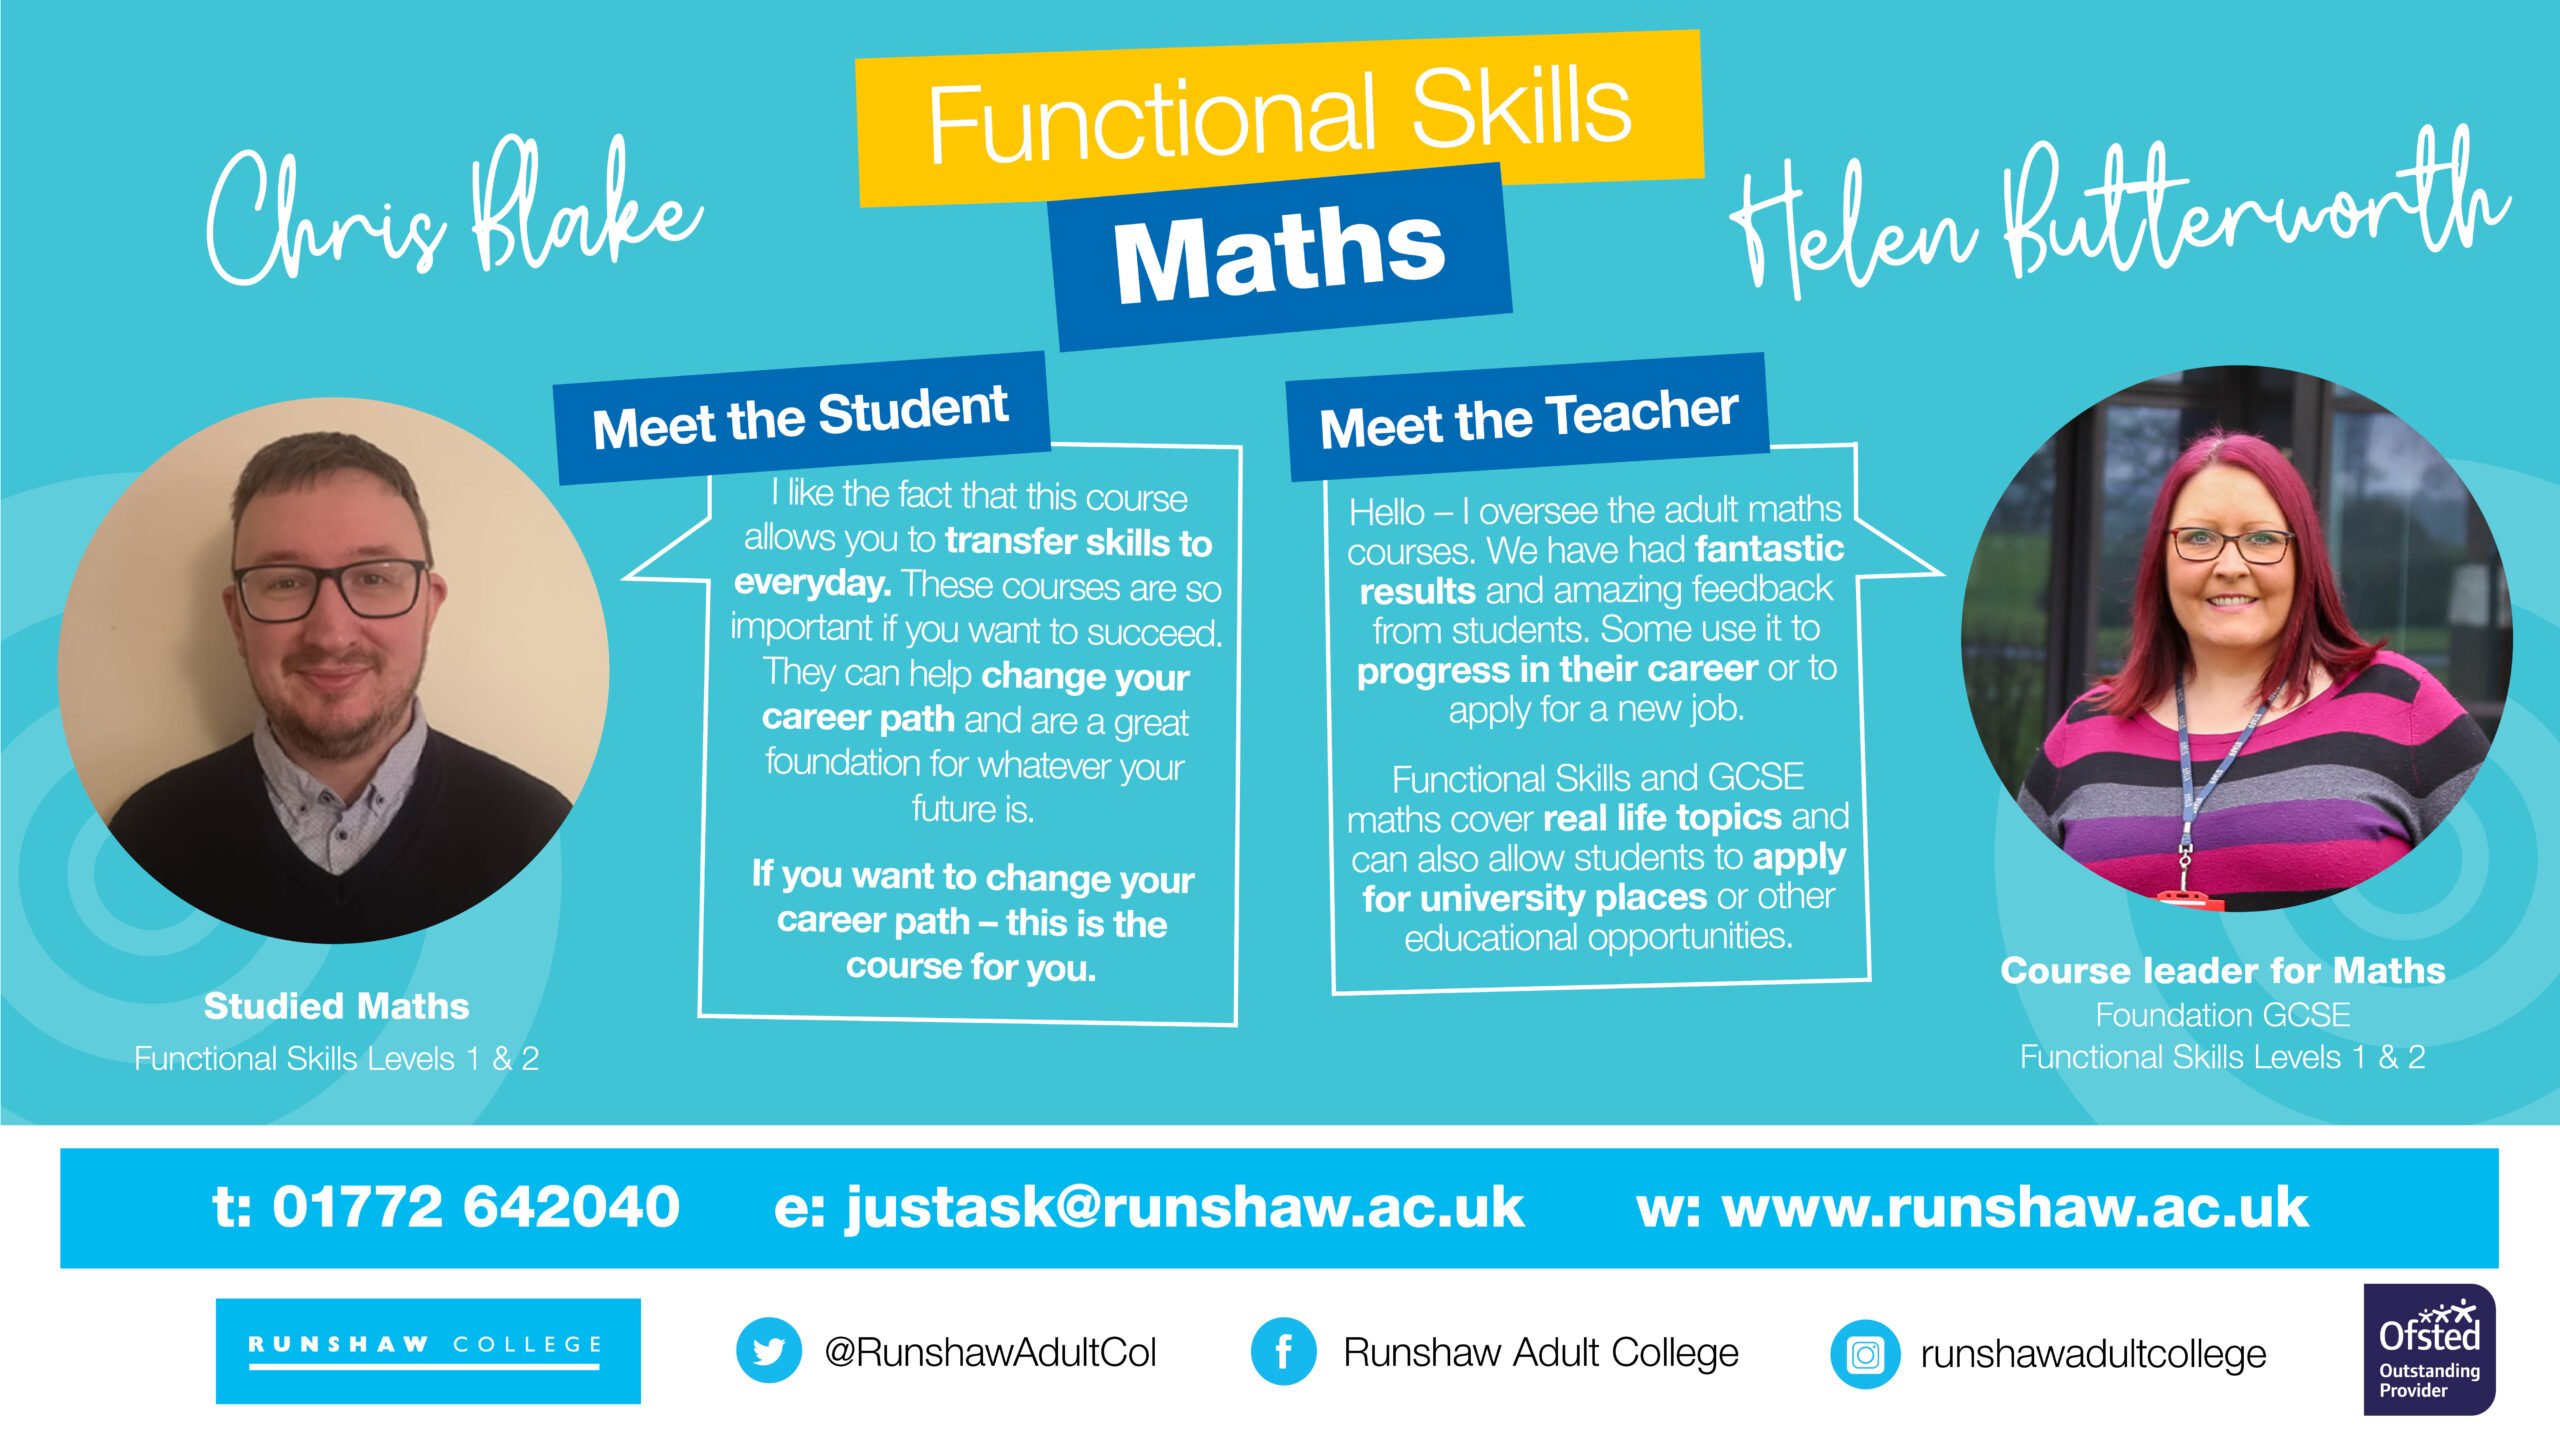 Graphic showing photos of Maths Functional Skills student Chris Blake and Course Leader Helen Butterworth. Chris’ speech bubble reads “I like the fact that this course allows you to transfer skills to everyday. These courses are so important if you want to succeed. They can help change your career path and are a great foundation for whatever your future is. If you want to change your career path – this is the course for you.” Helen’s speech bubble reads “Hello – I oversee the adult maths courses. We have had fantastic results and amazing feedback from students. Some use it to progress in their career or to apply for a new job. Functional Skills and GCSE maths cover real life topics and can also allow students to apply for university places or other educational opportunities.”